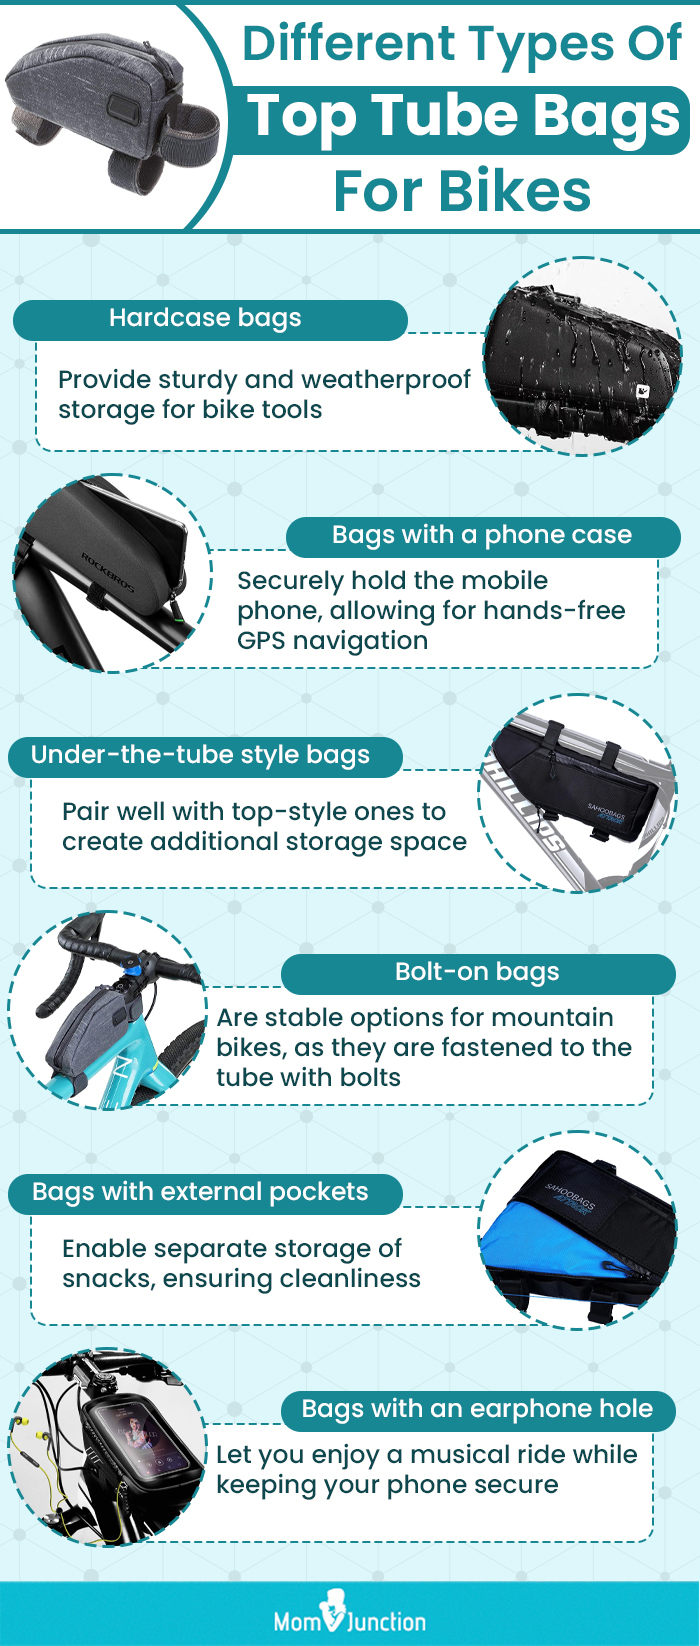 Different Types Of Top Tube Bags For Bikes (infographic)